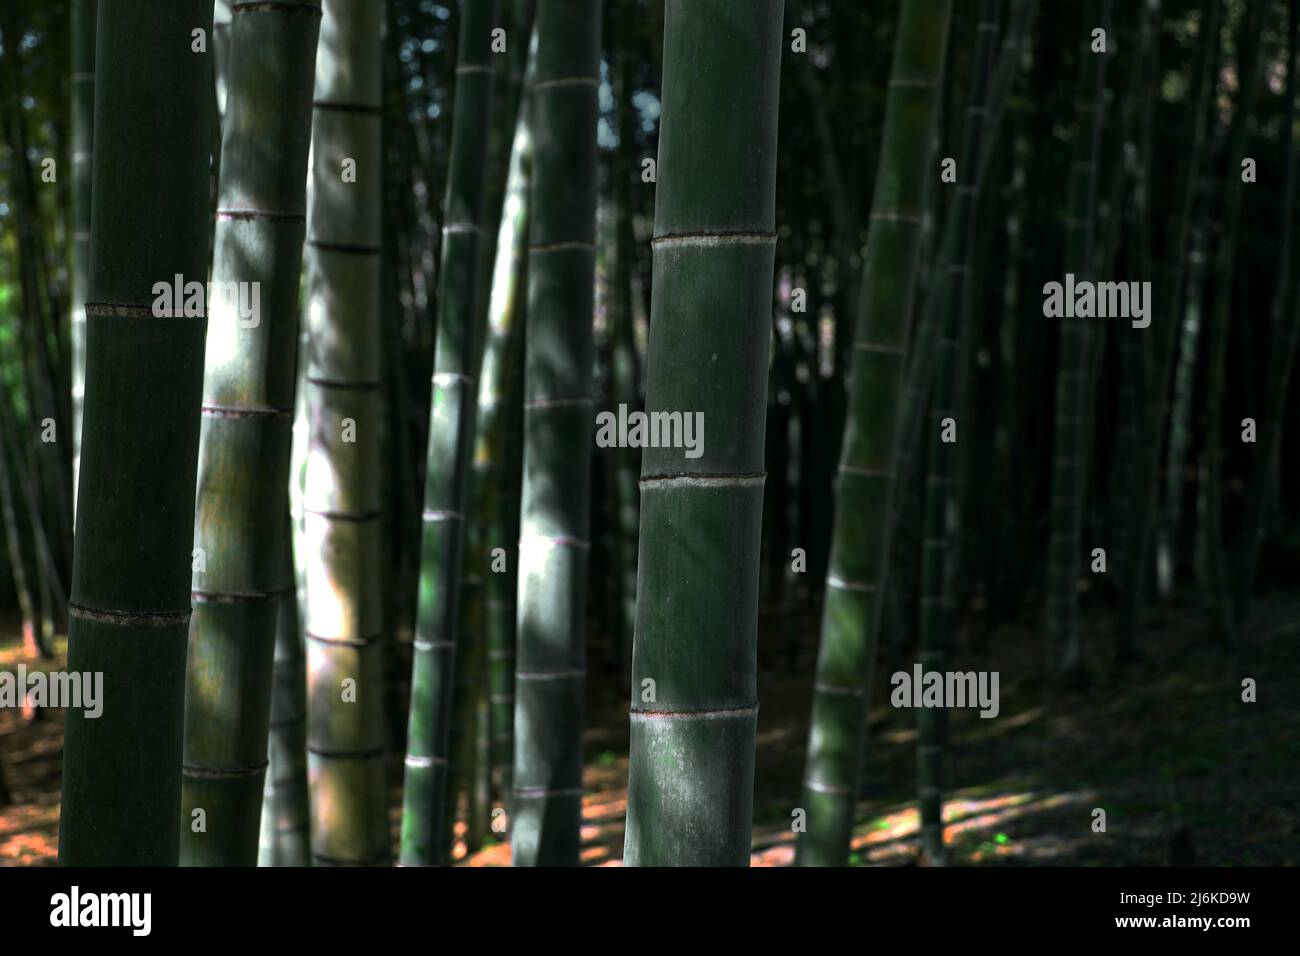 Japanese bamboo grove as a background material Stock Photo